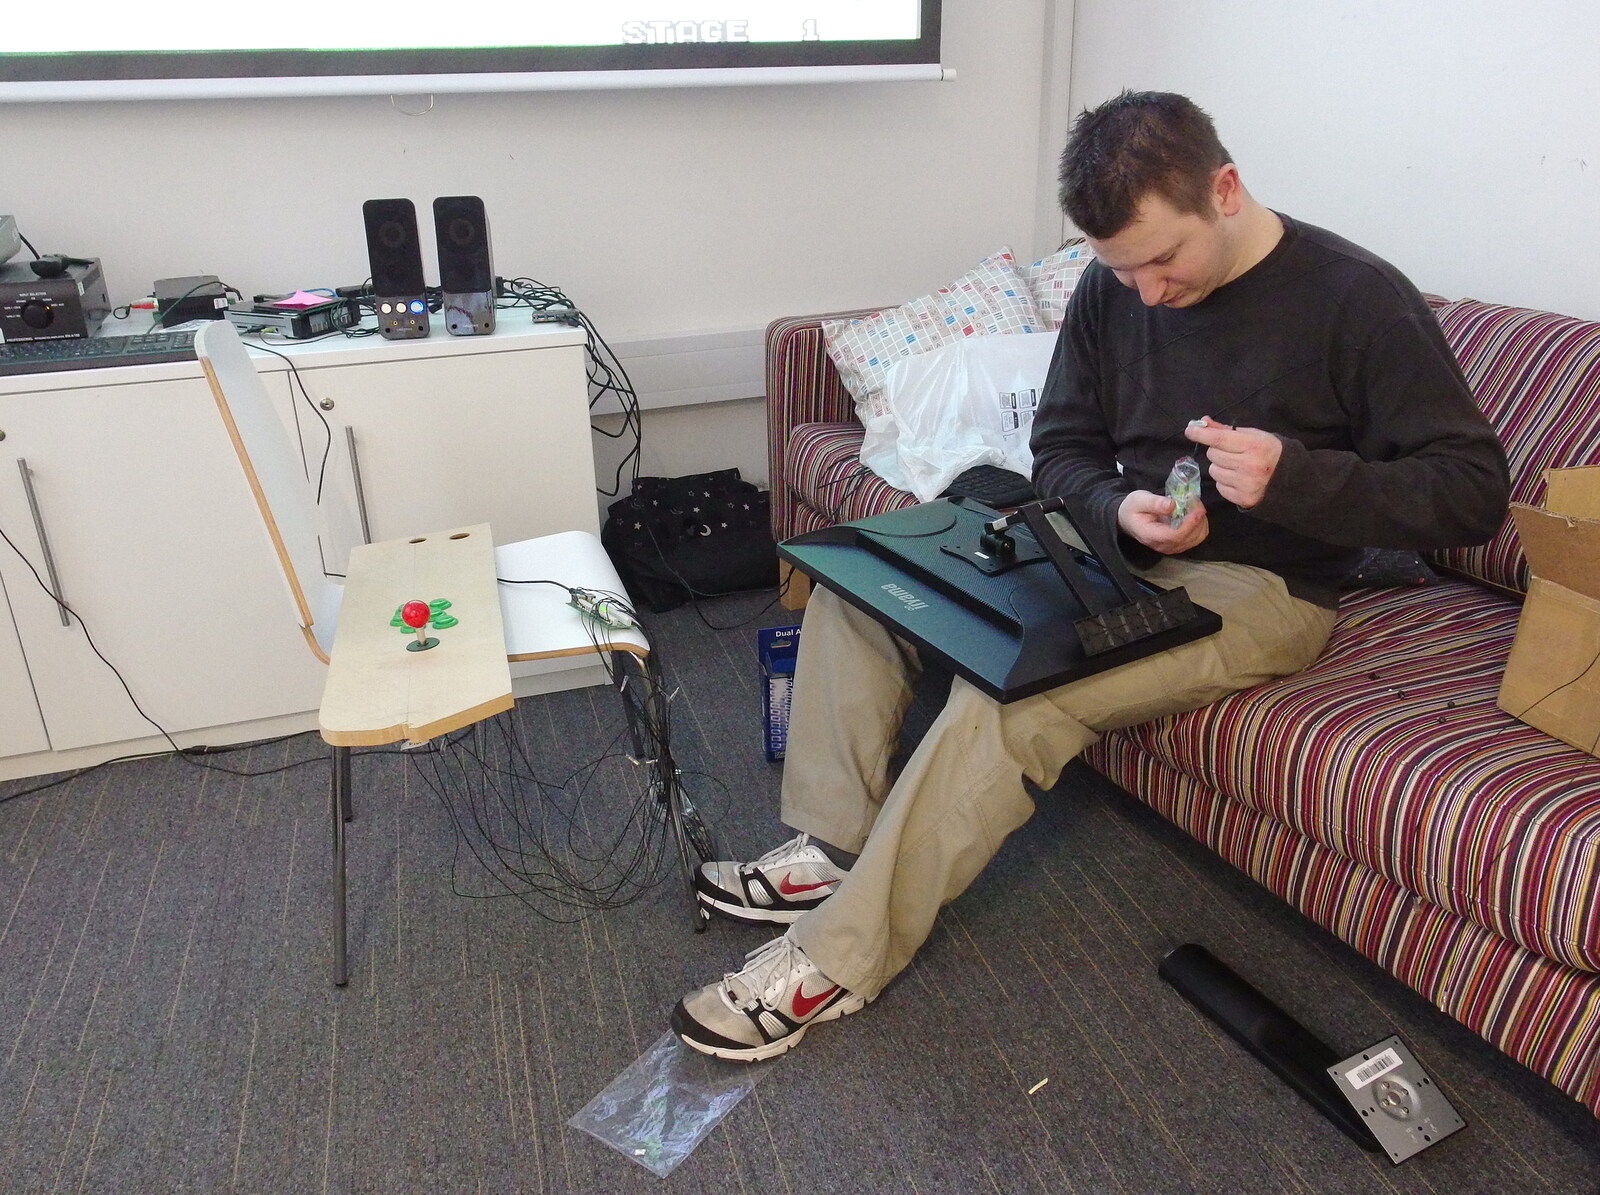 SwiftKey's Arcade Cabinet, and the Streets of Southwark, London - 5th December 2013: Joe works on a monitor